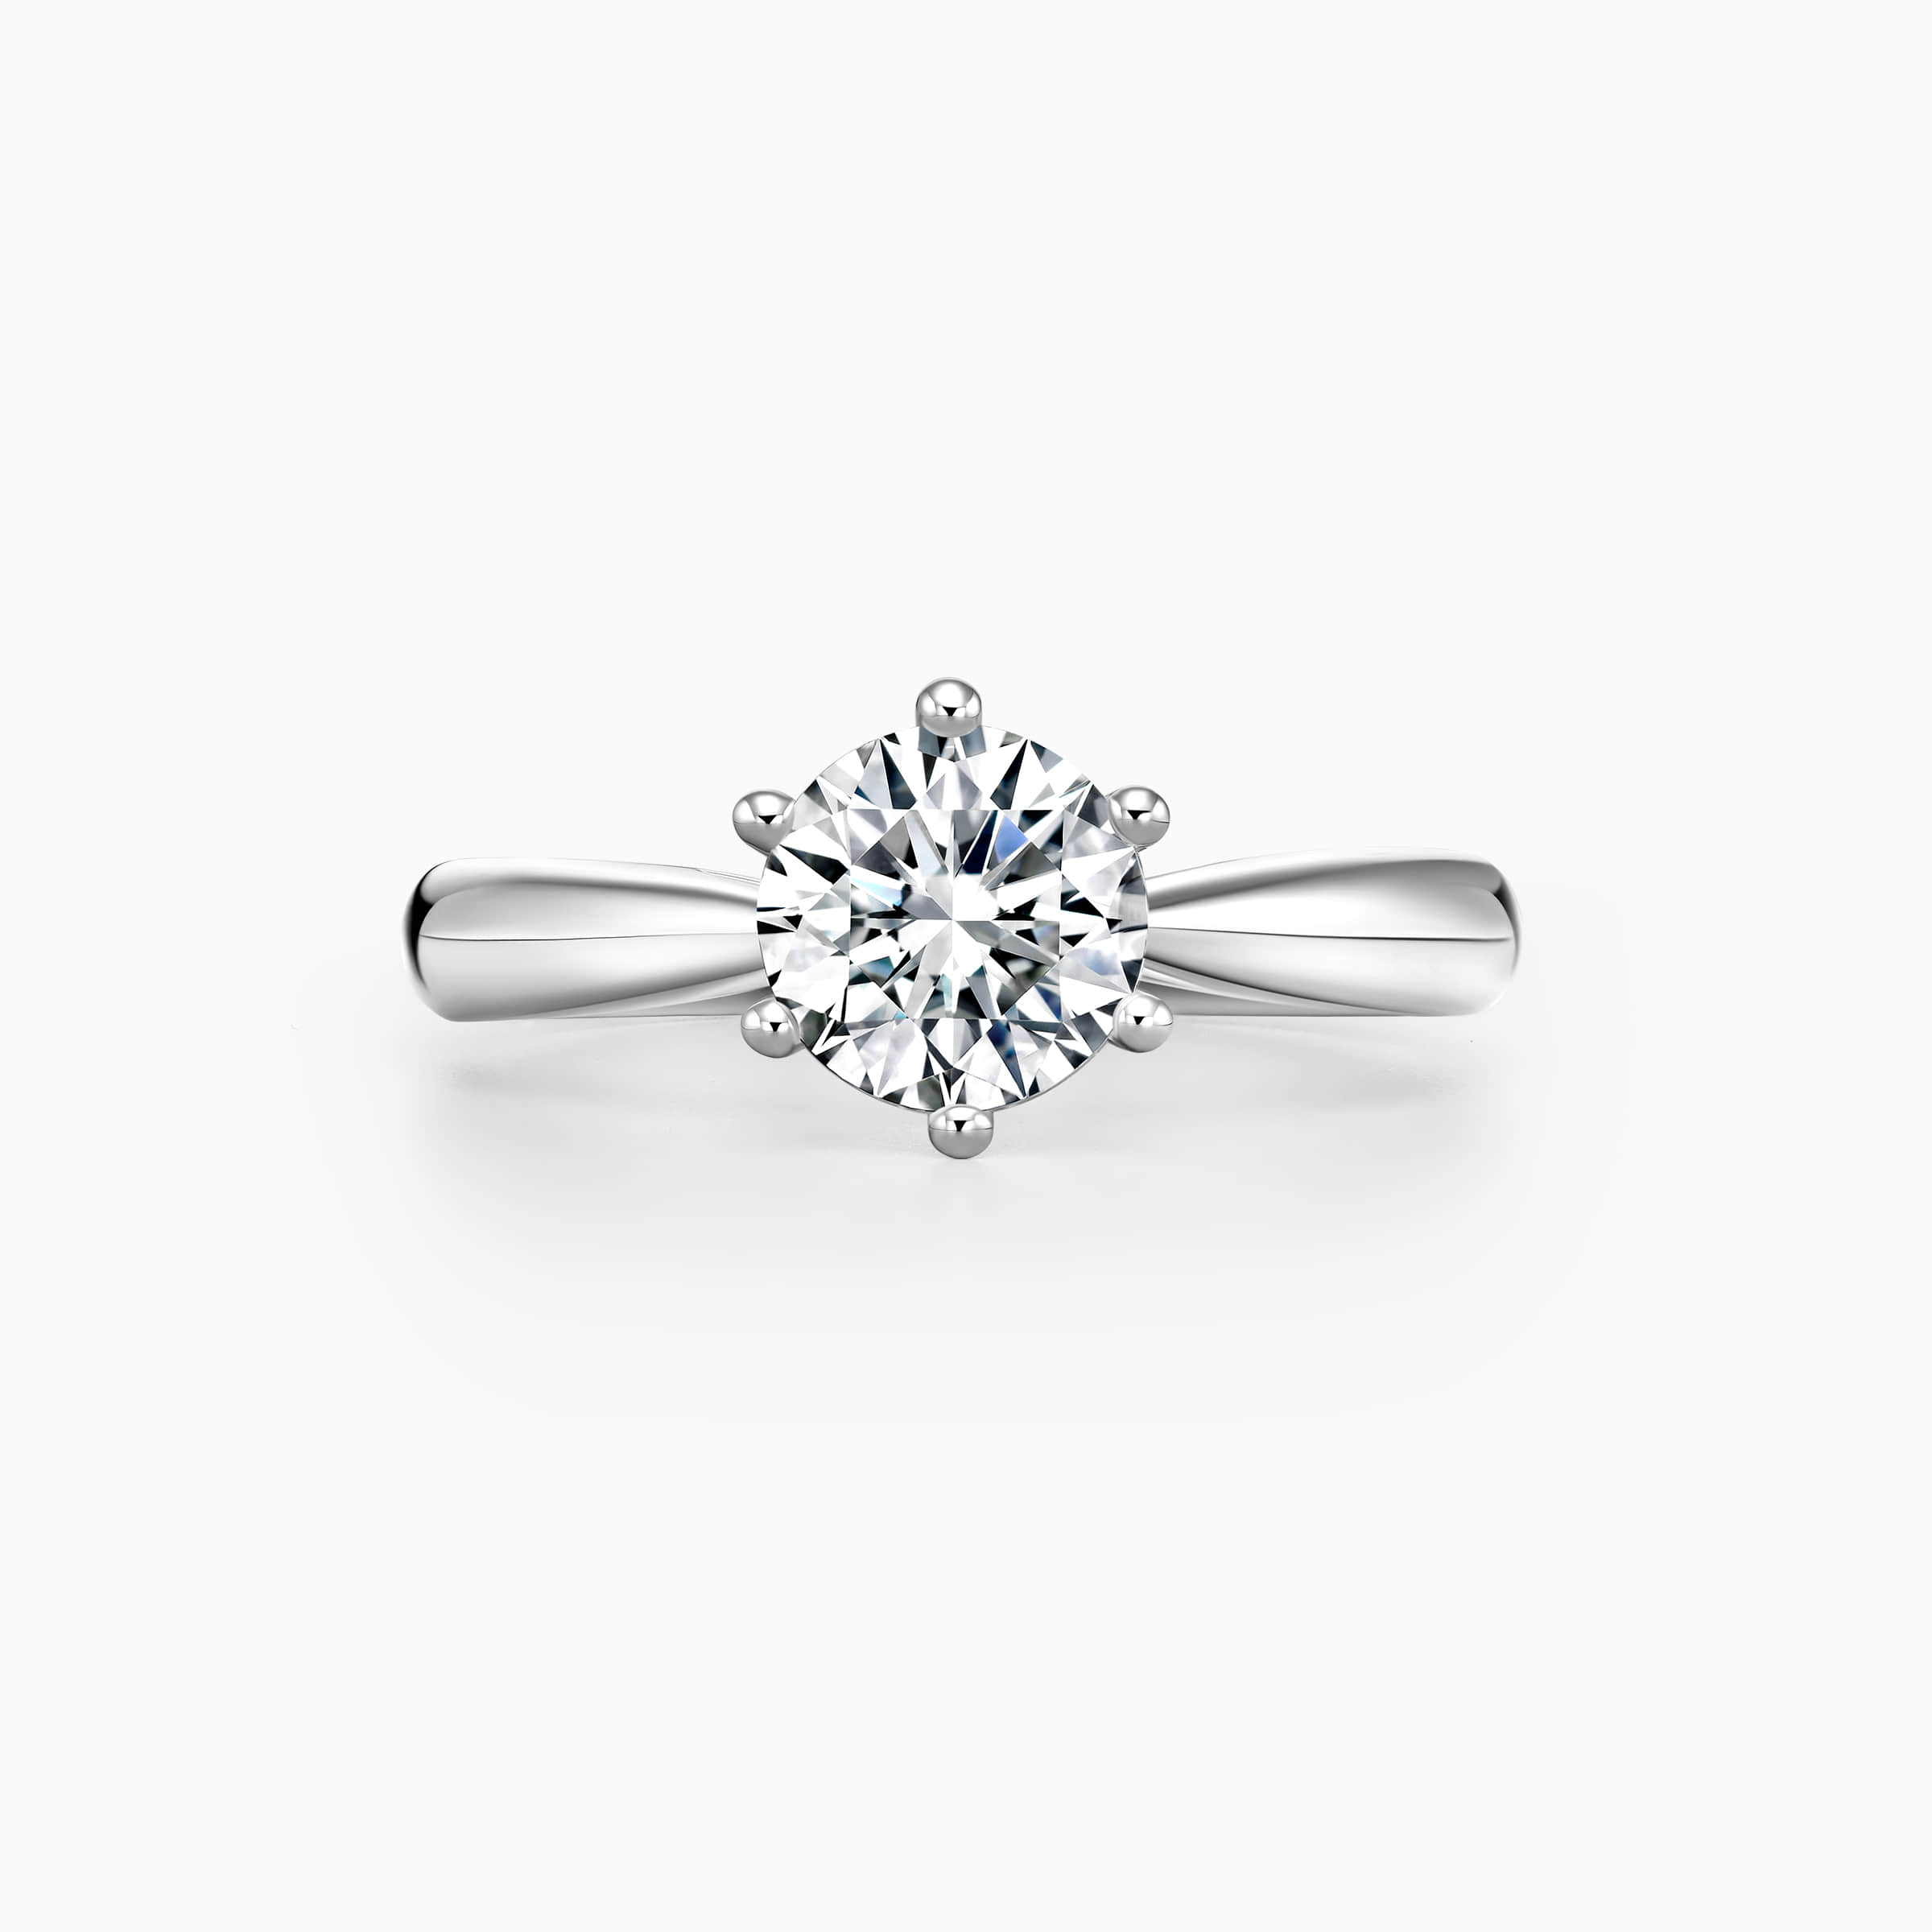 Darry Ring 6 prong solitaire engagement ring top view